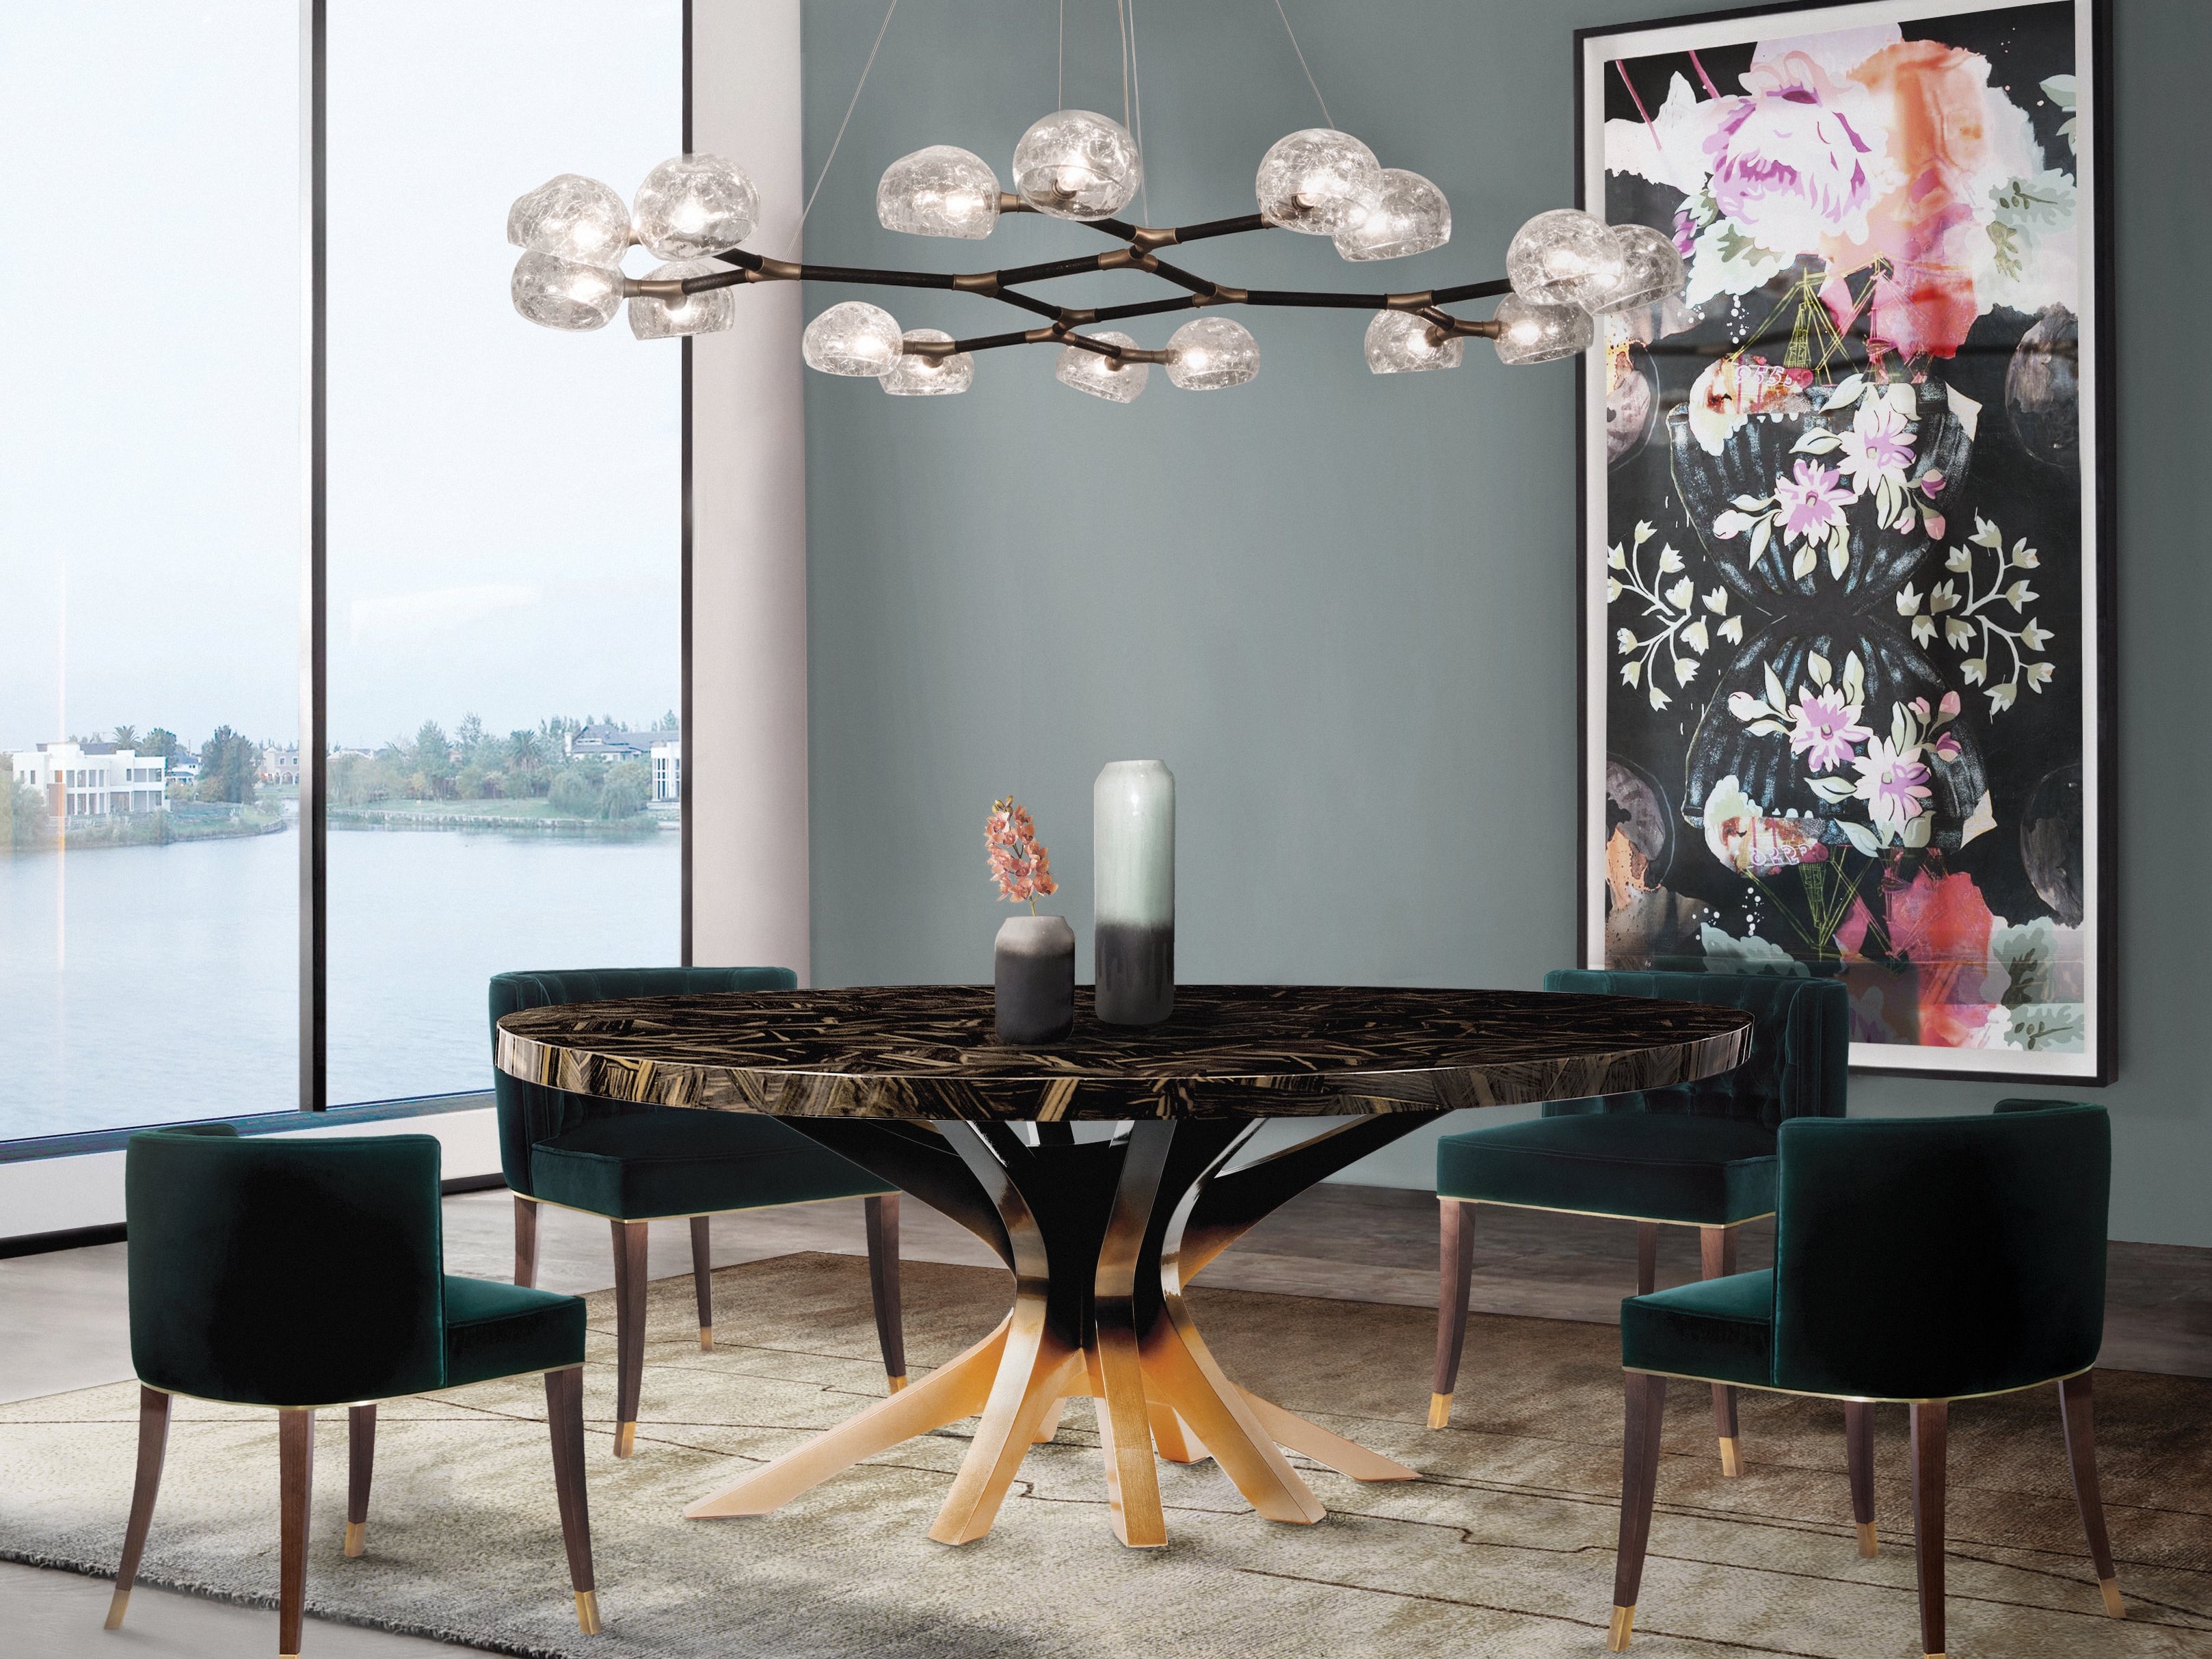 Fun Dining Room Decor With Nature Elements - Home'Society